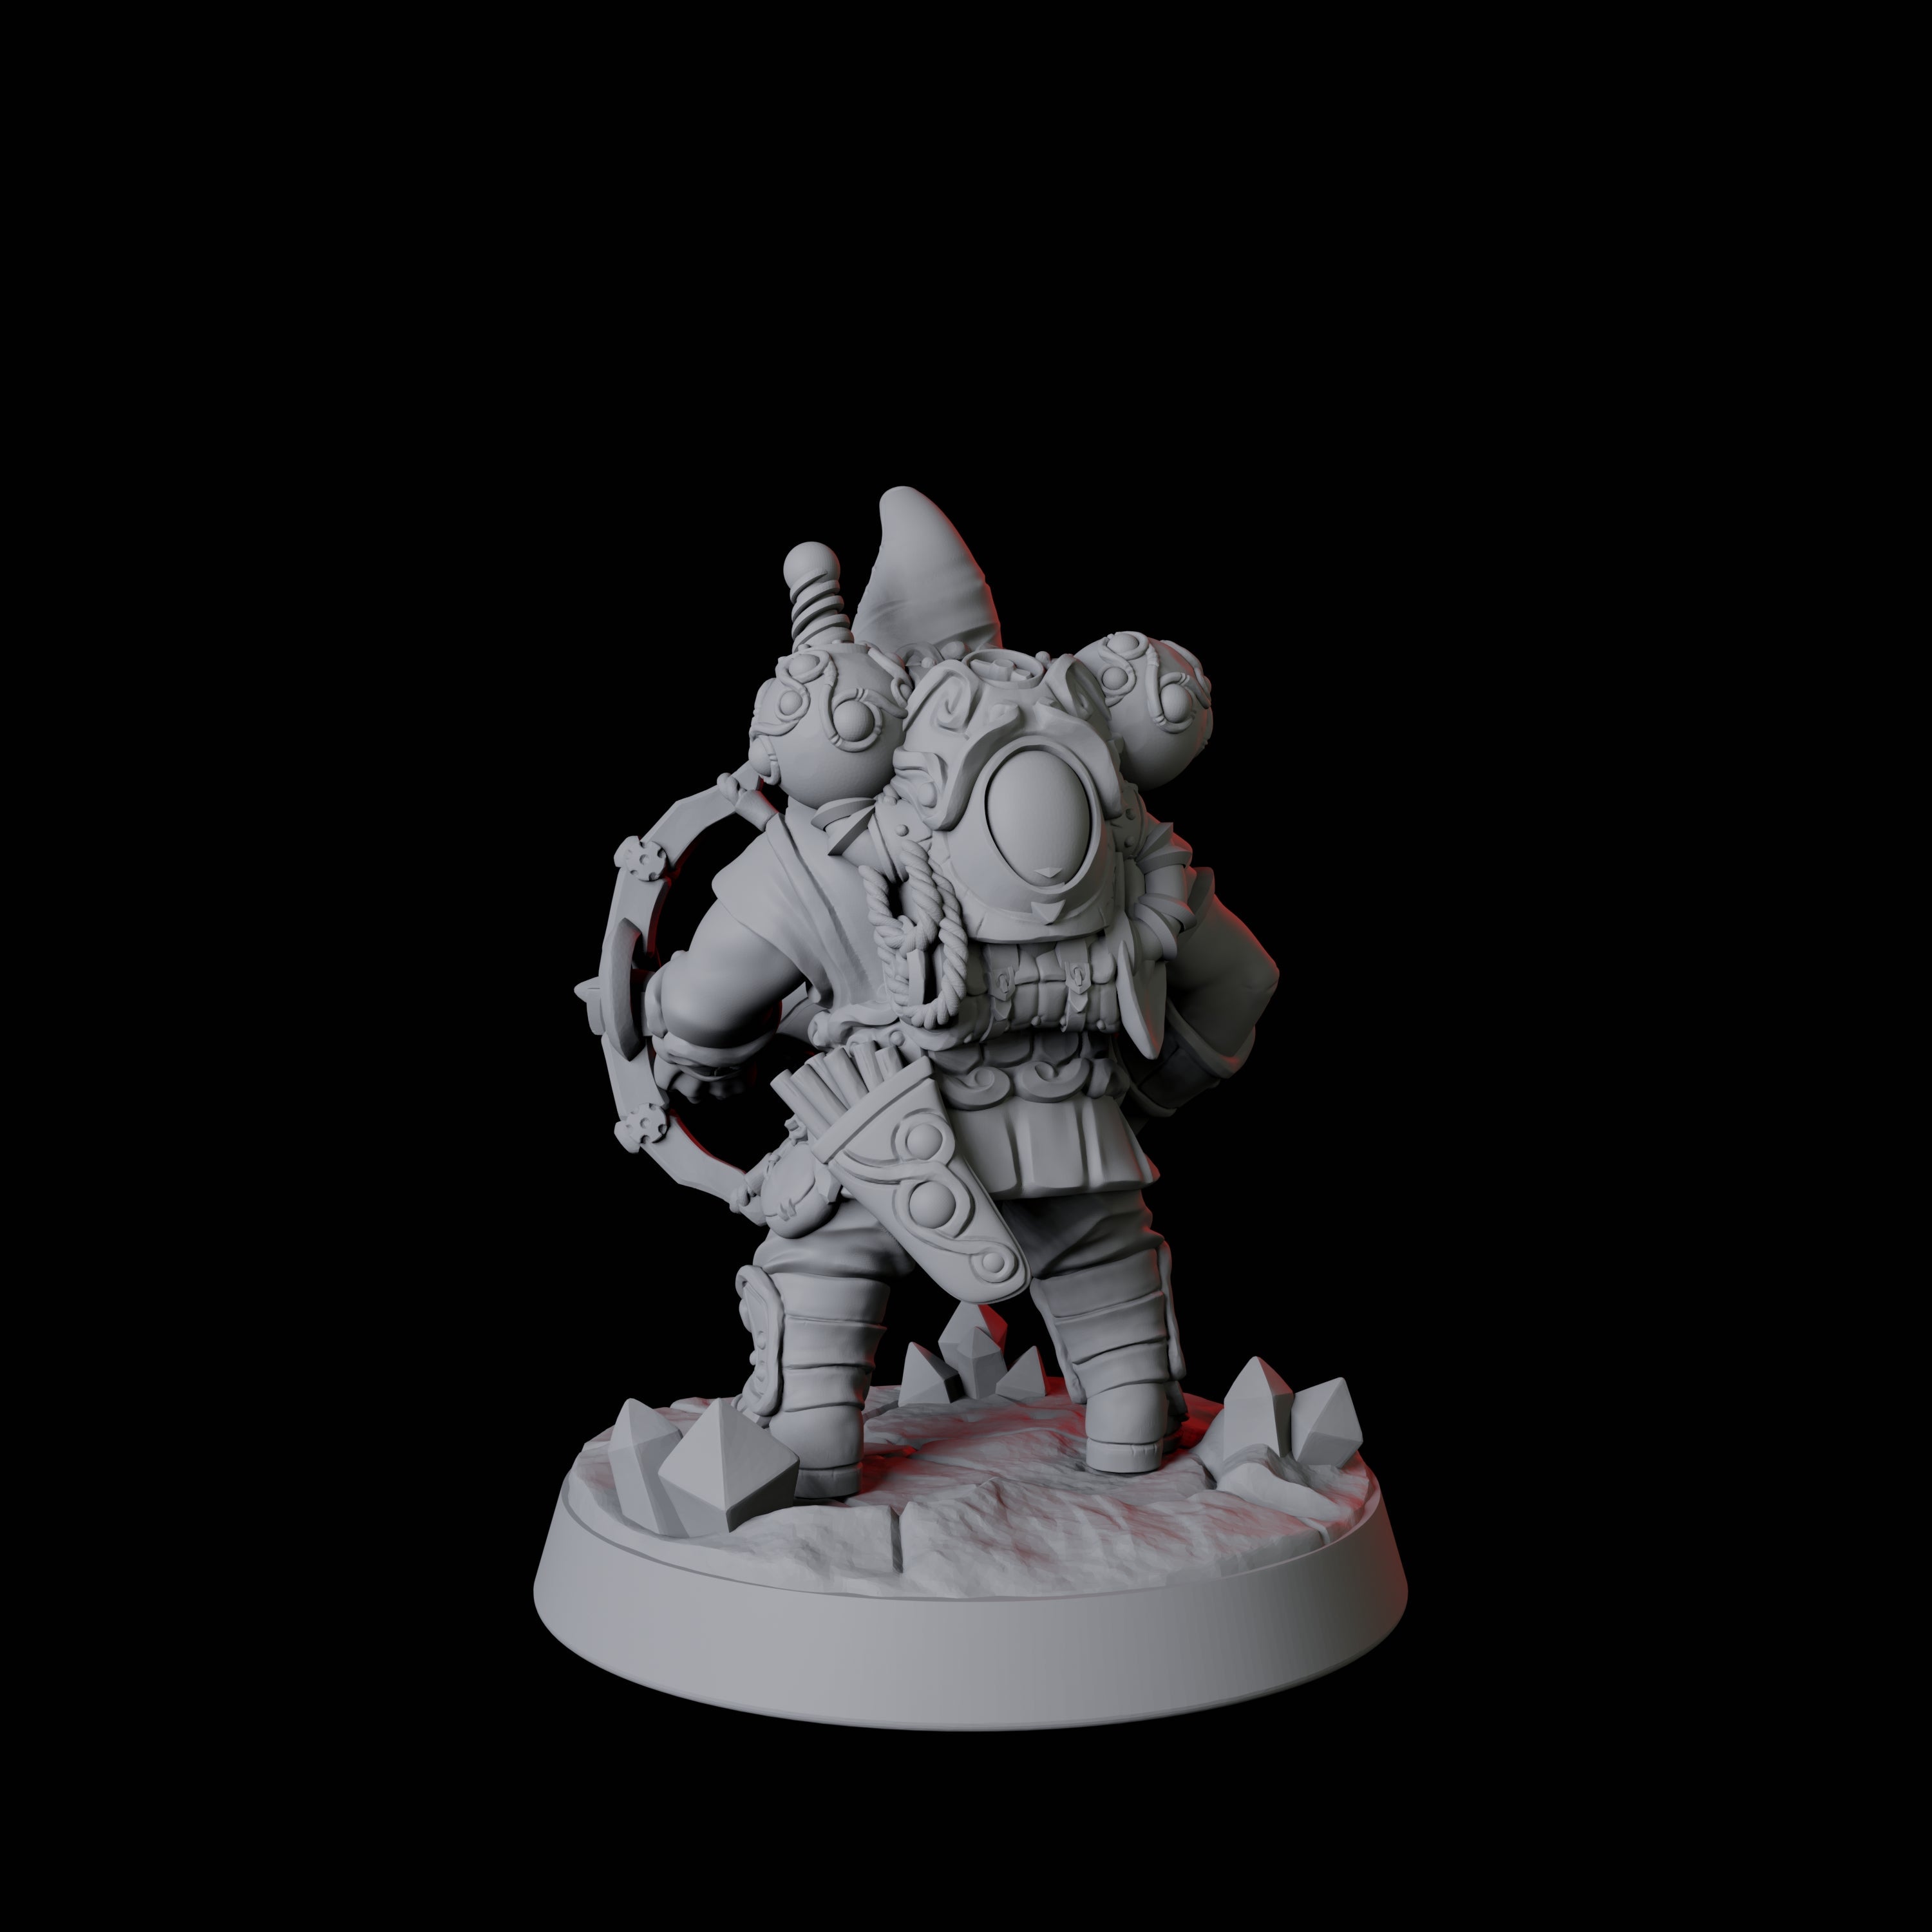 Deep Gnome Artificer B Miniature for Dungeons and Dragons, Pathfinder or other TTRPGs